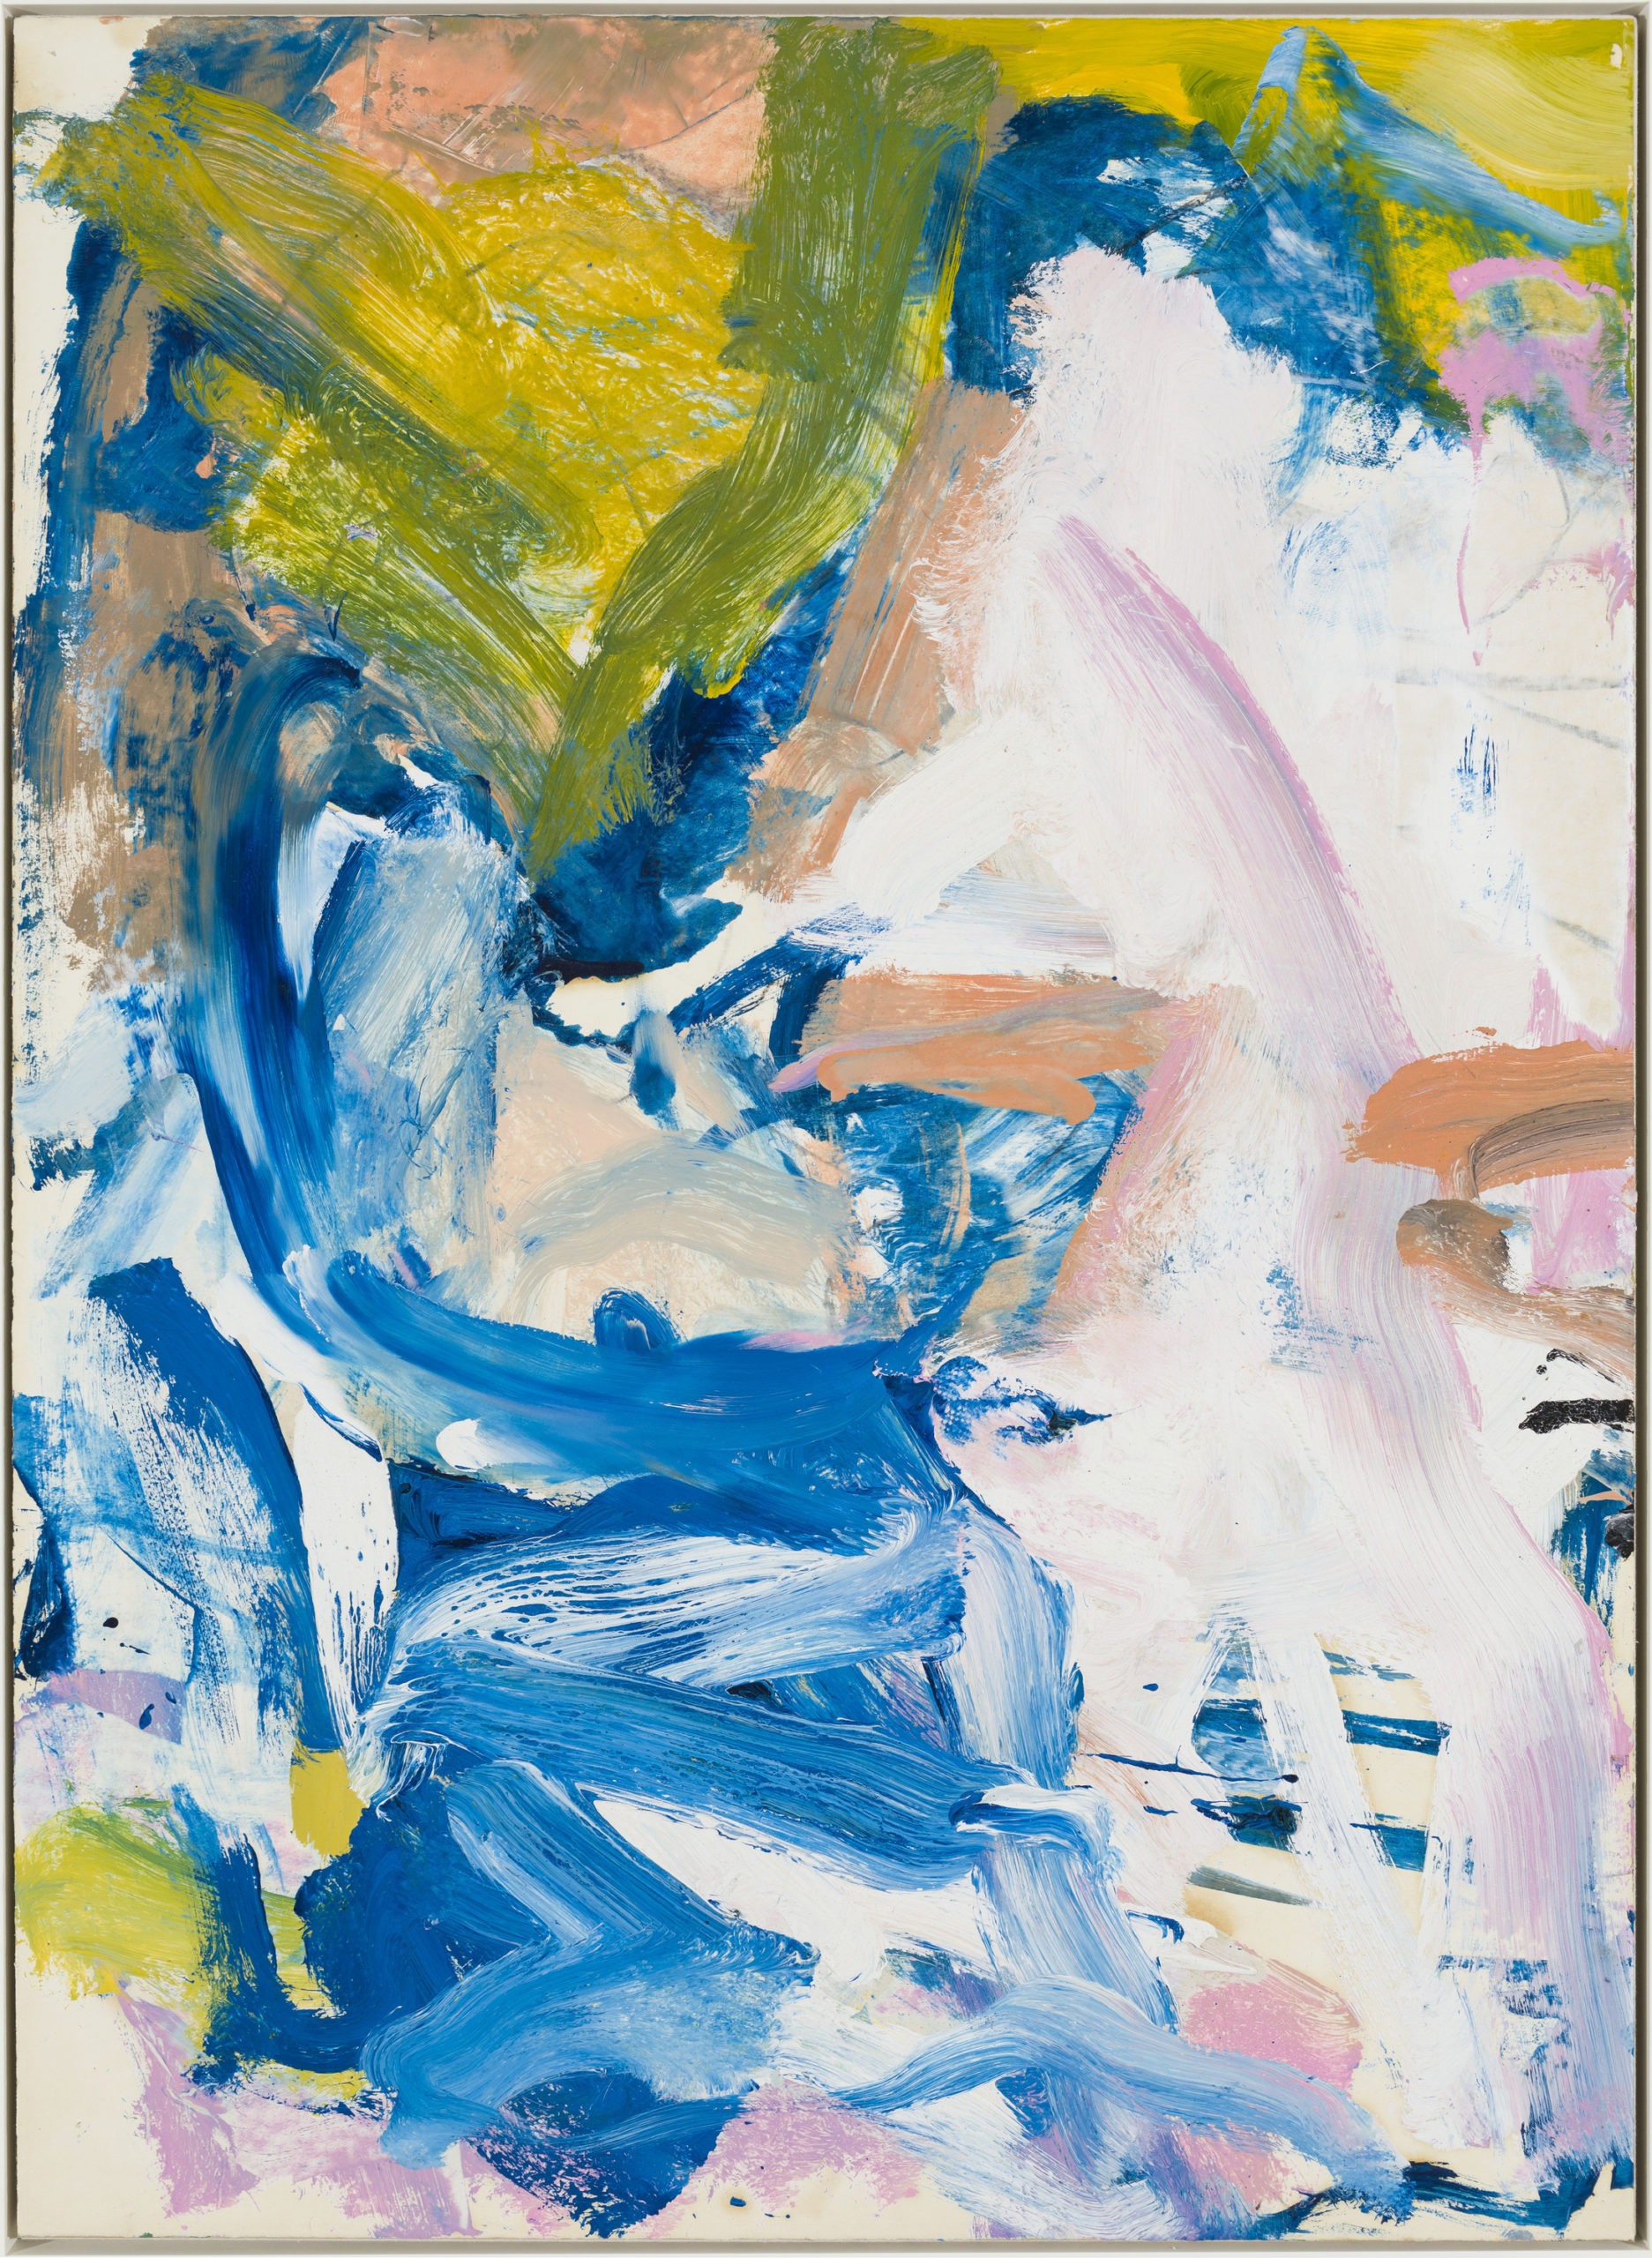 A 1977 painting by Willem de Kooning, which demonstrates an airier and more delicate approach to his work, is on view in the group exhibition, 